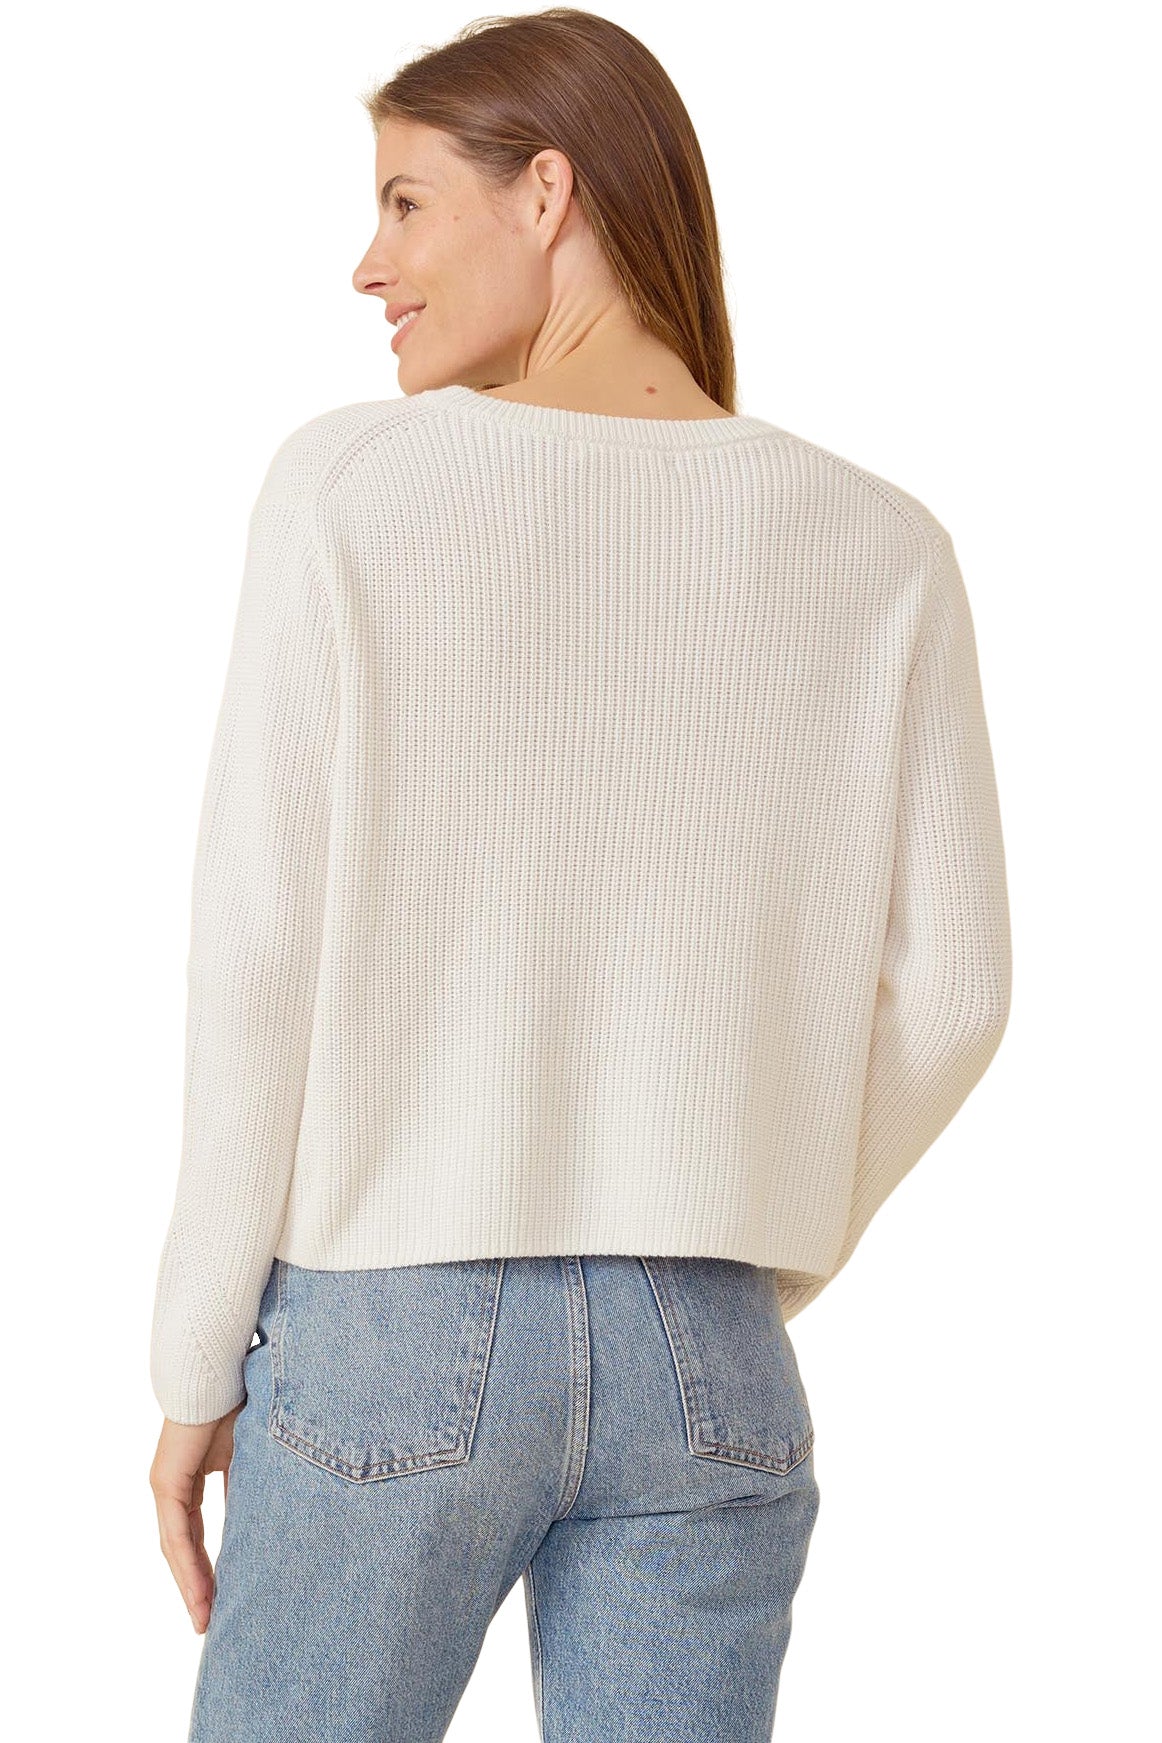 One Grey Day Orson Crewneck Pullover in Ivory